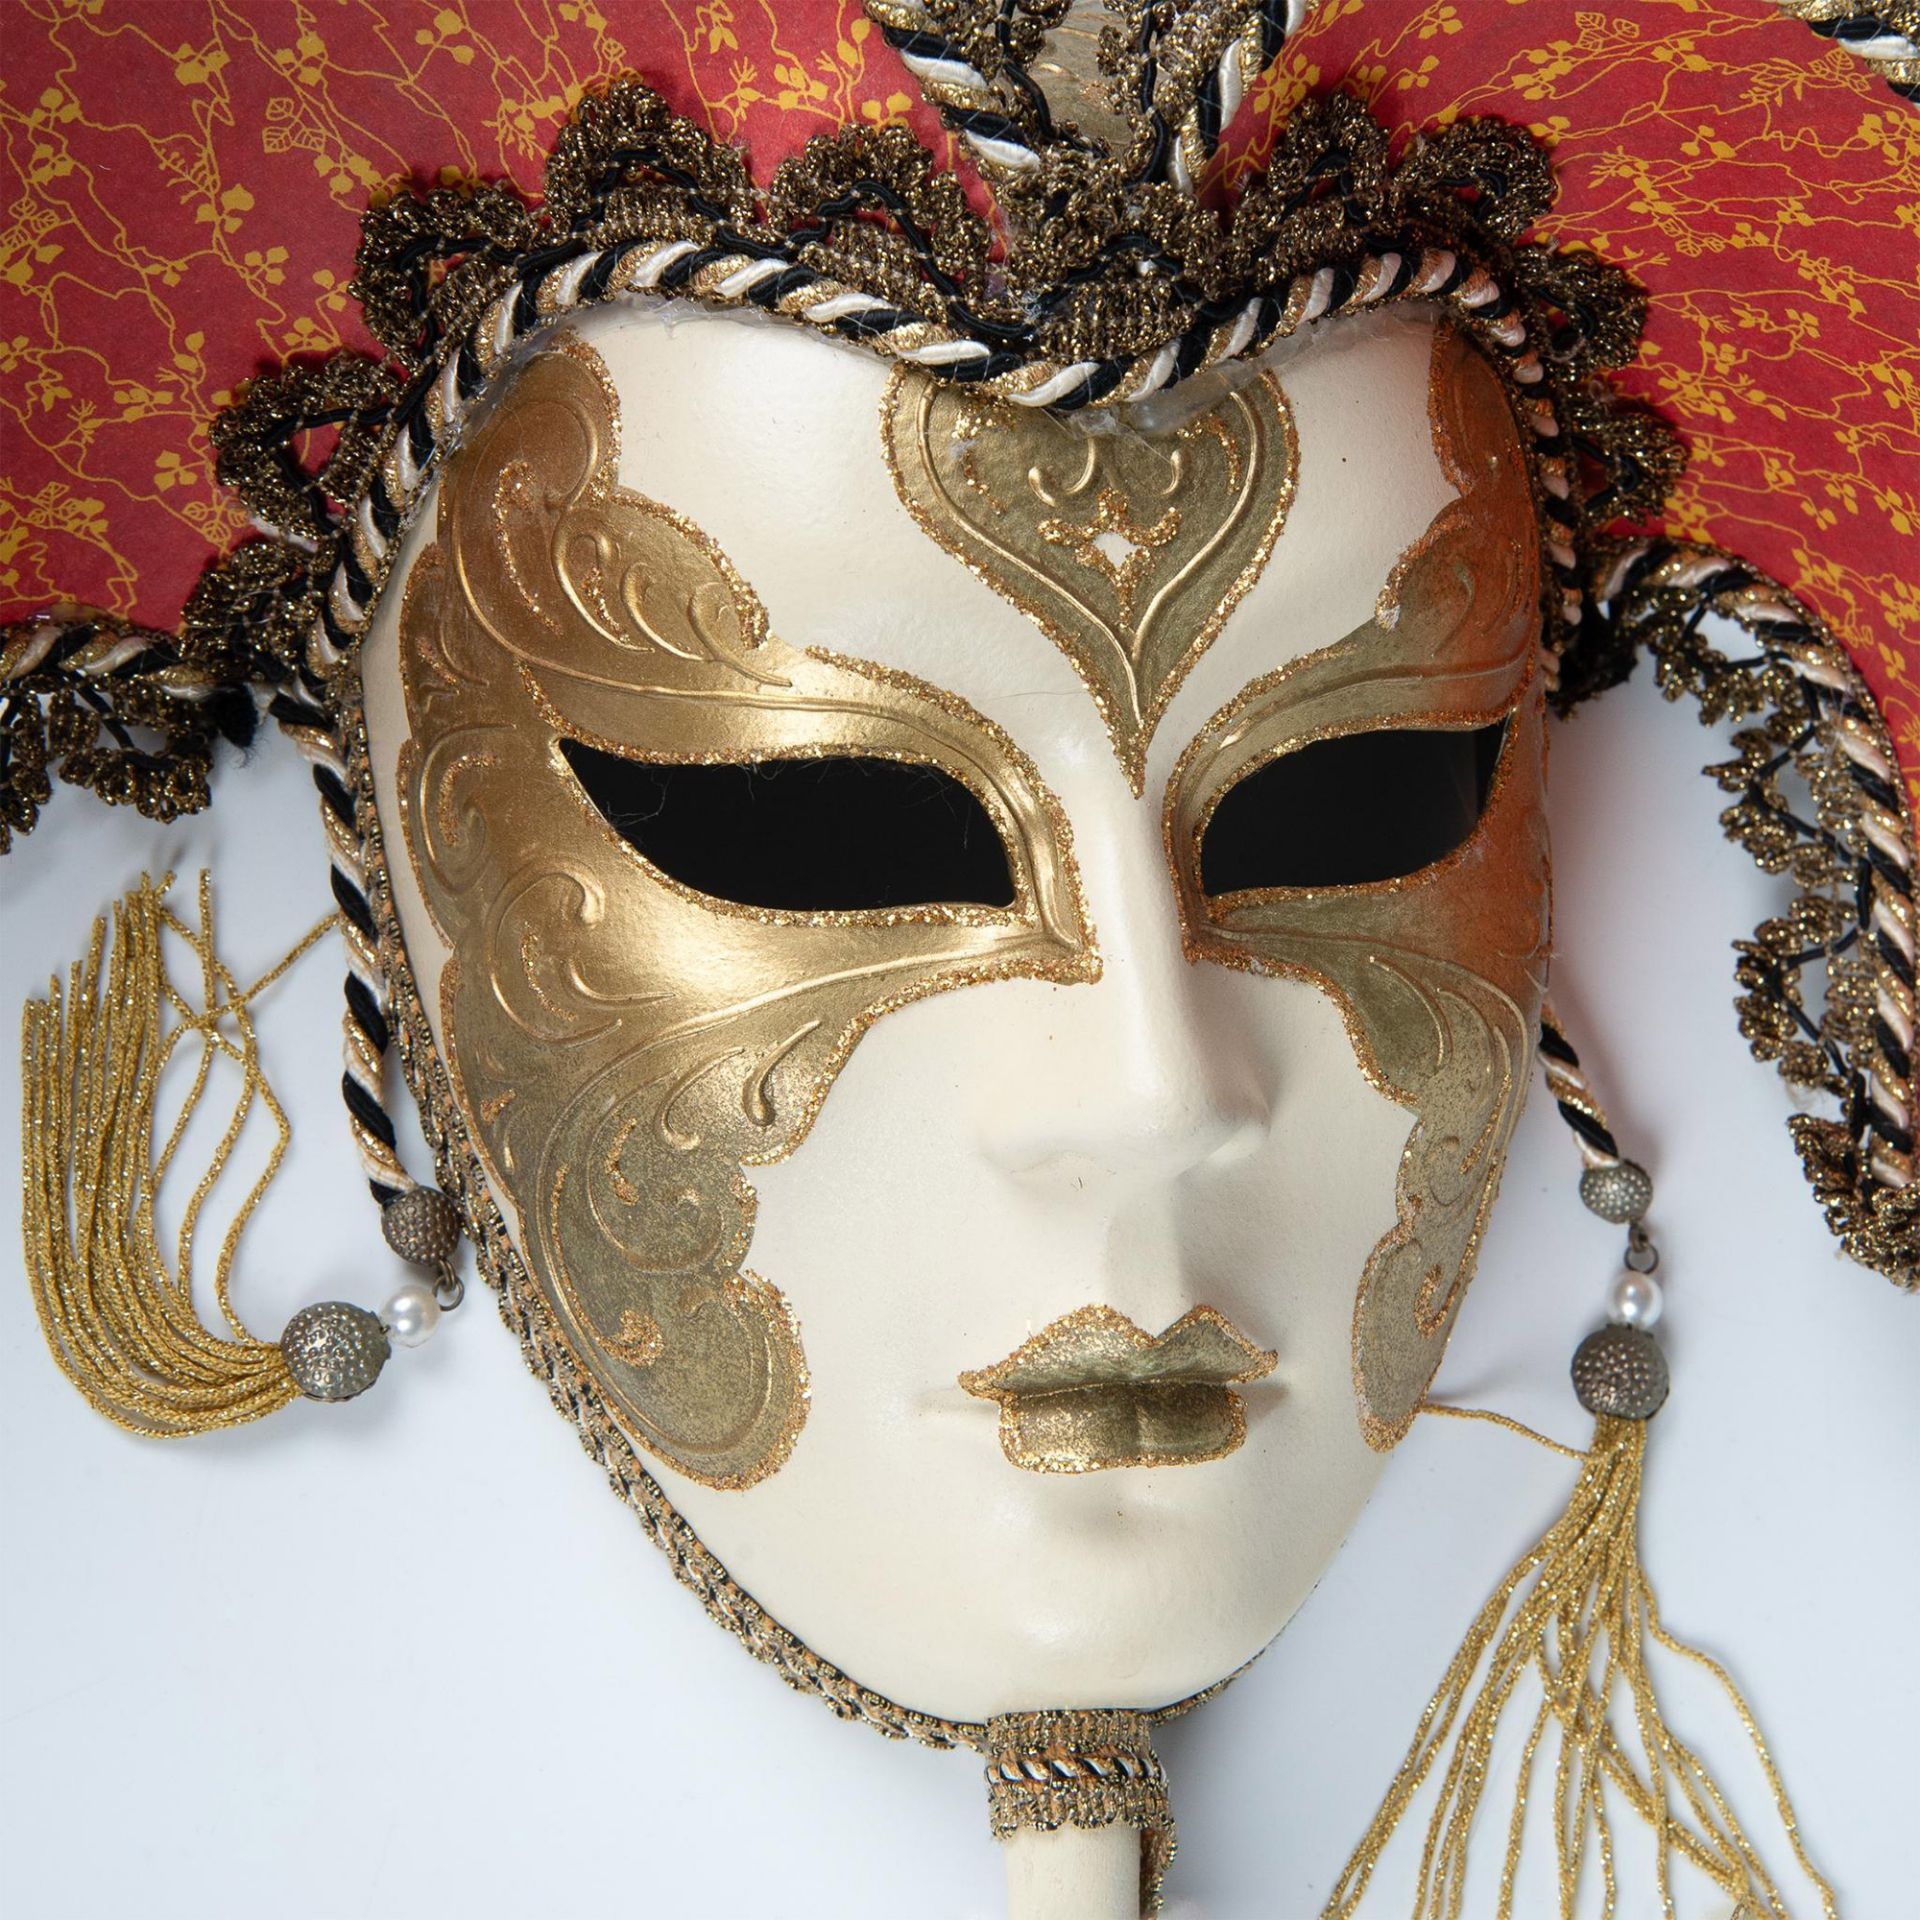 Hand Painted Venetian Carnival Mask - Image 2 of 3